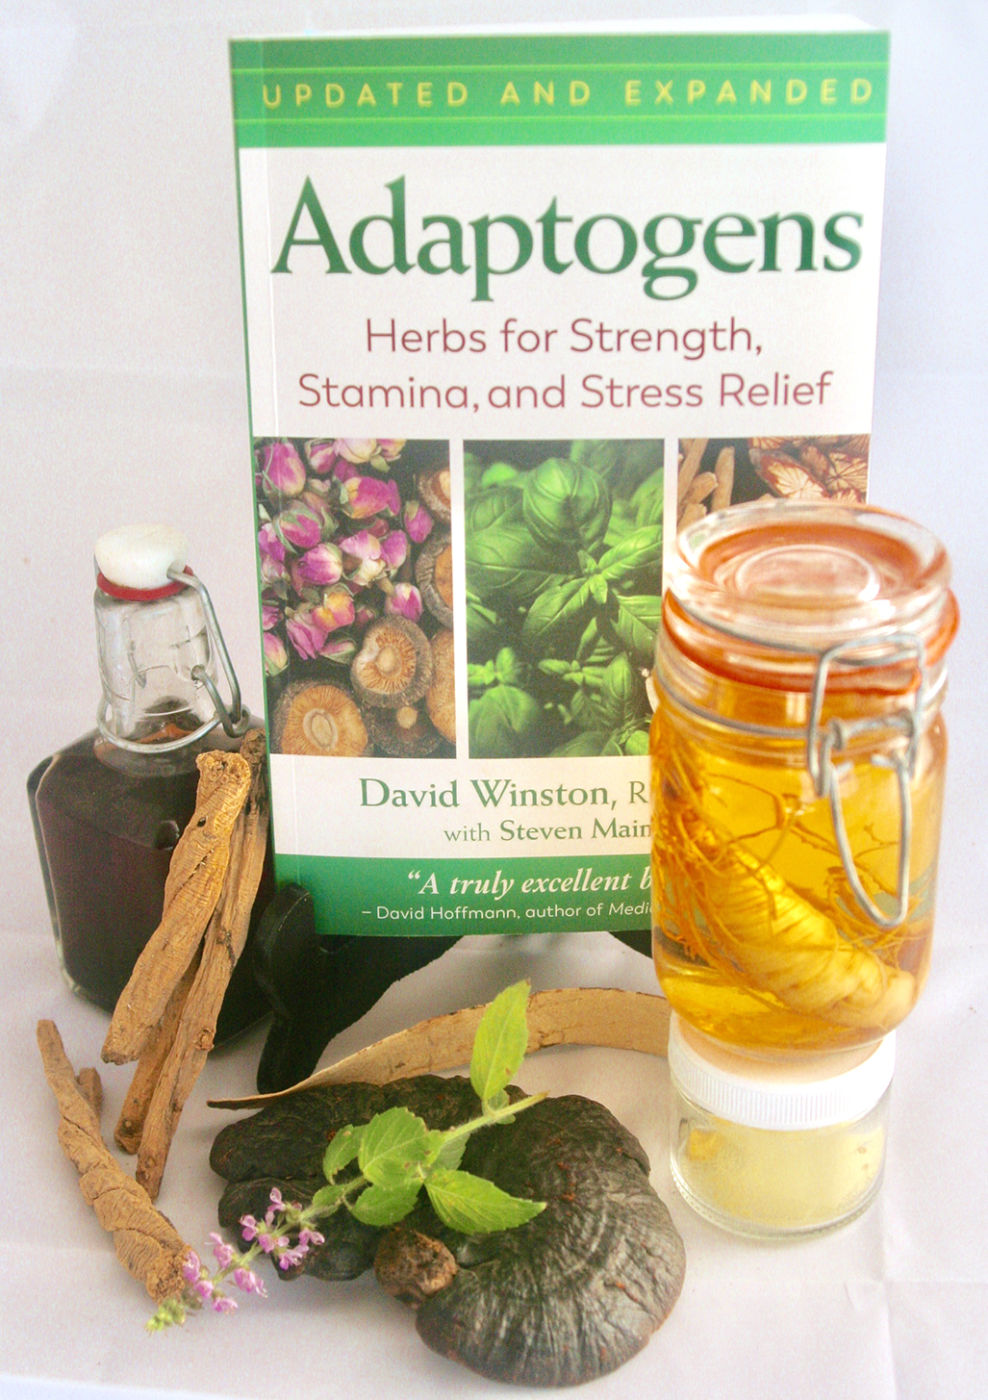 "Adaptogens - Herbs for Strength, Stamina, and Stress Relief" by David Winston.